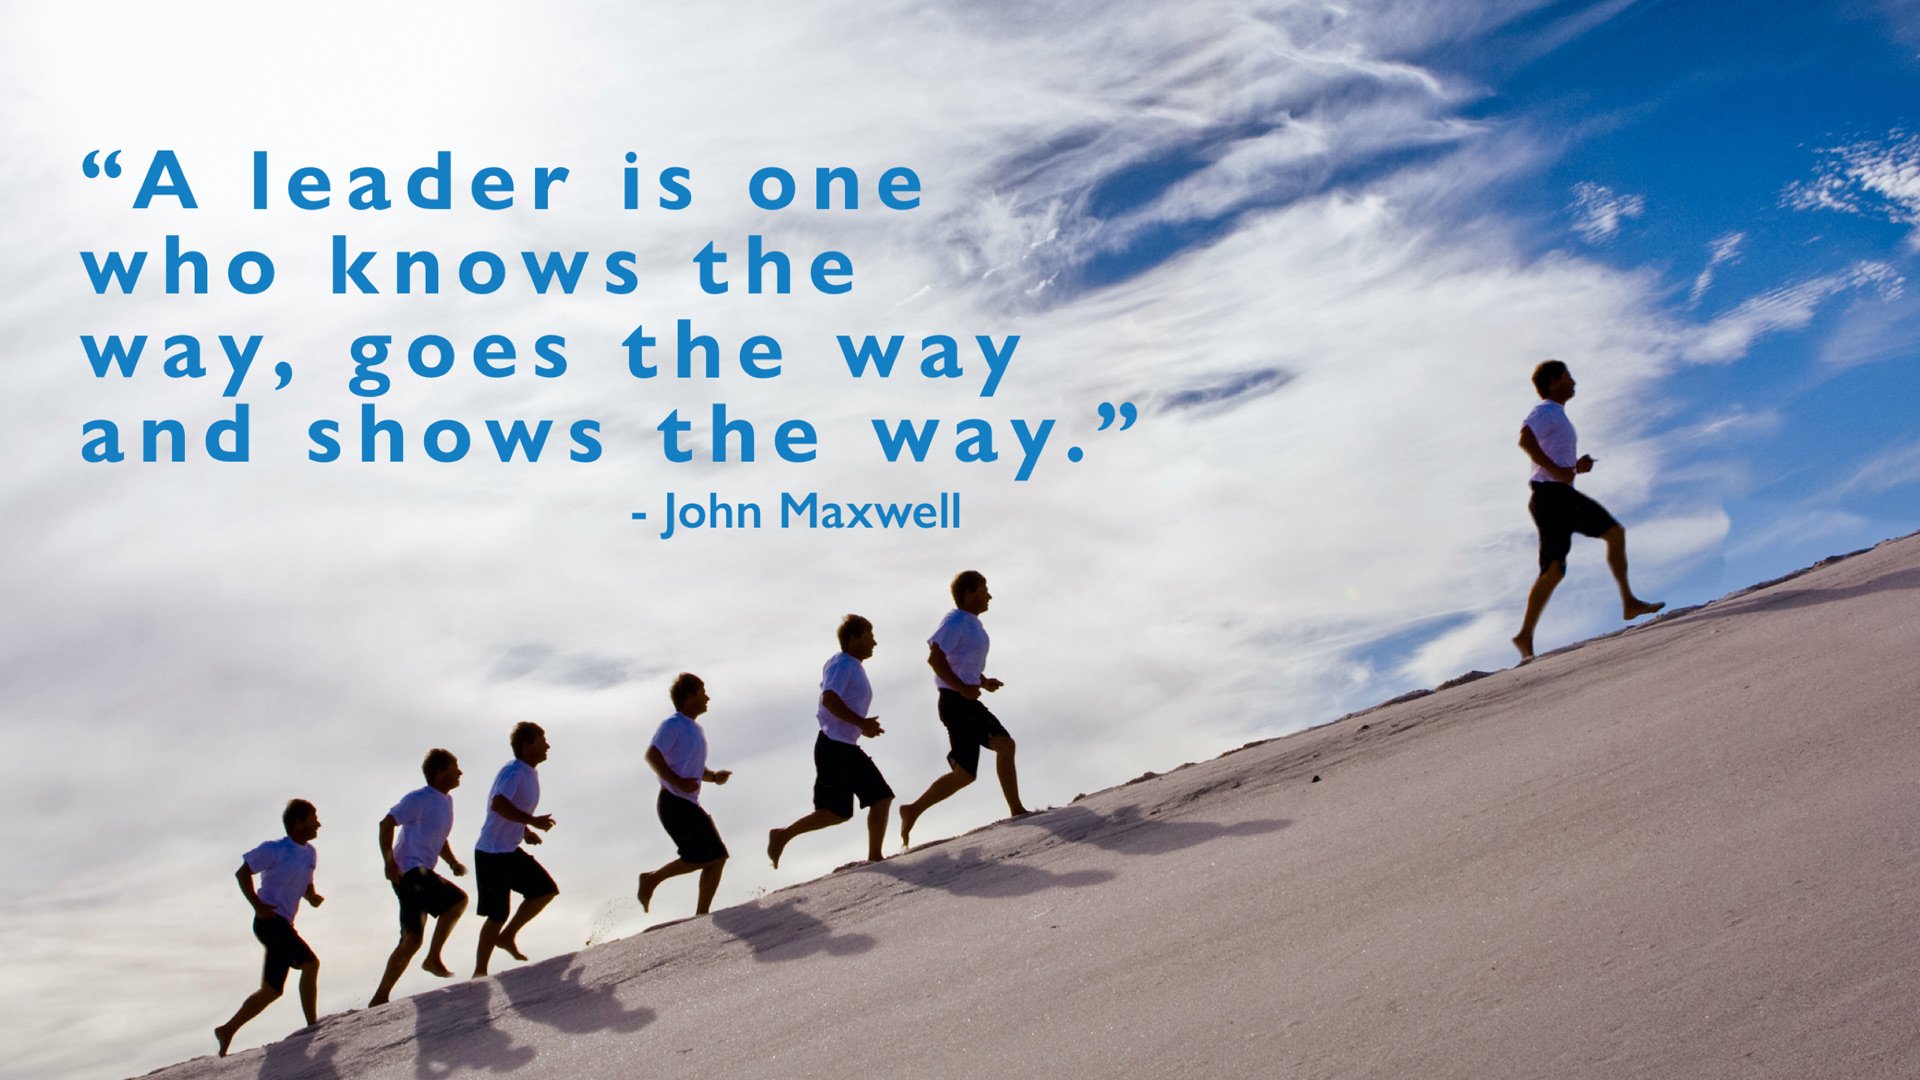 A leader is one who knows the way, goes the way and shows the way.  John Maxwell